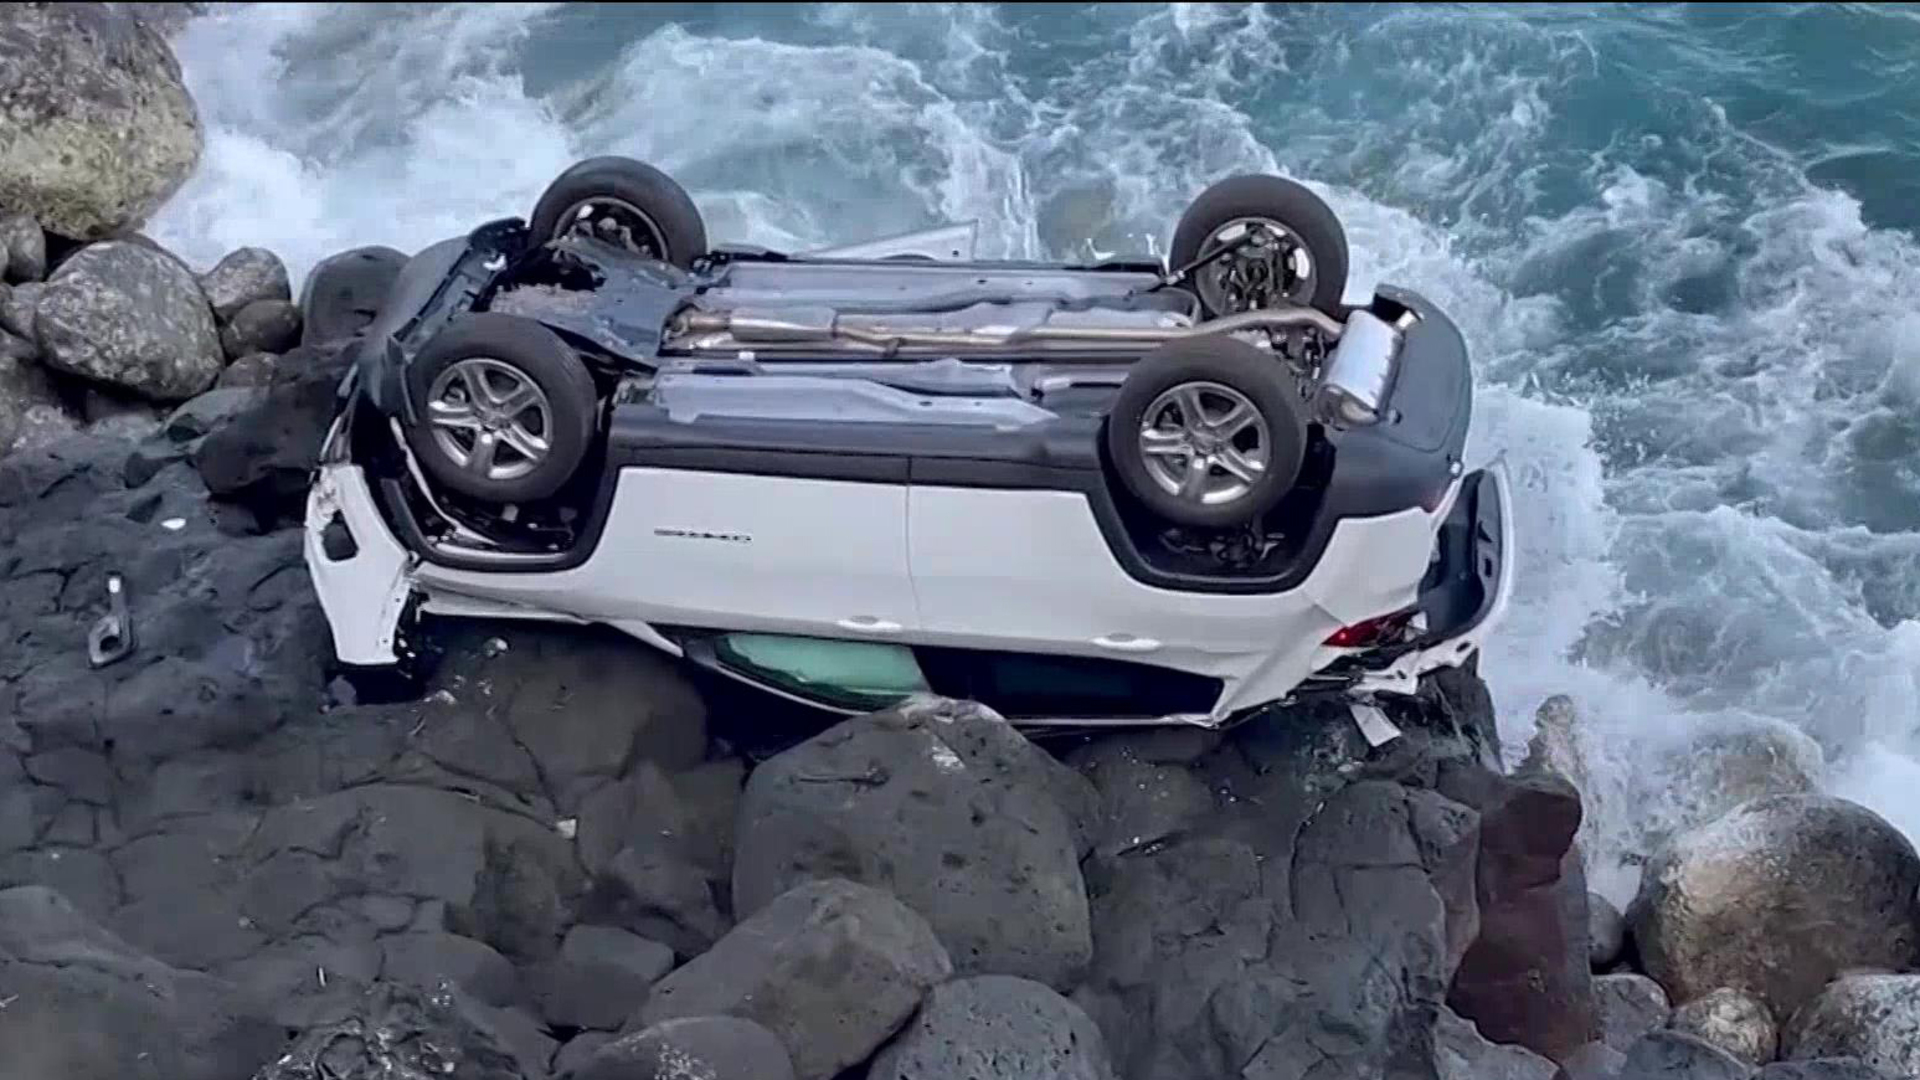 Canadian tourist survives after driving car off cliff in Hawaii